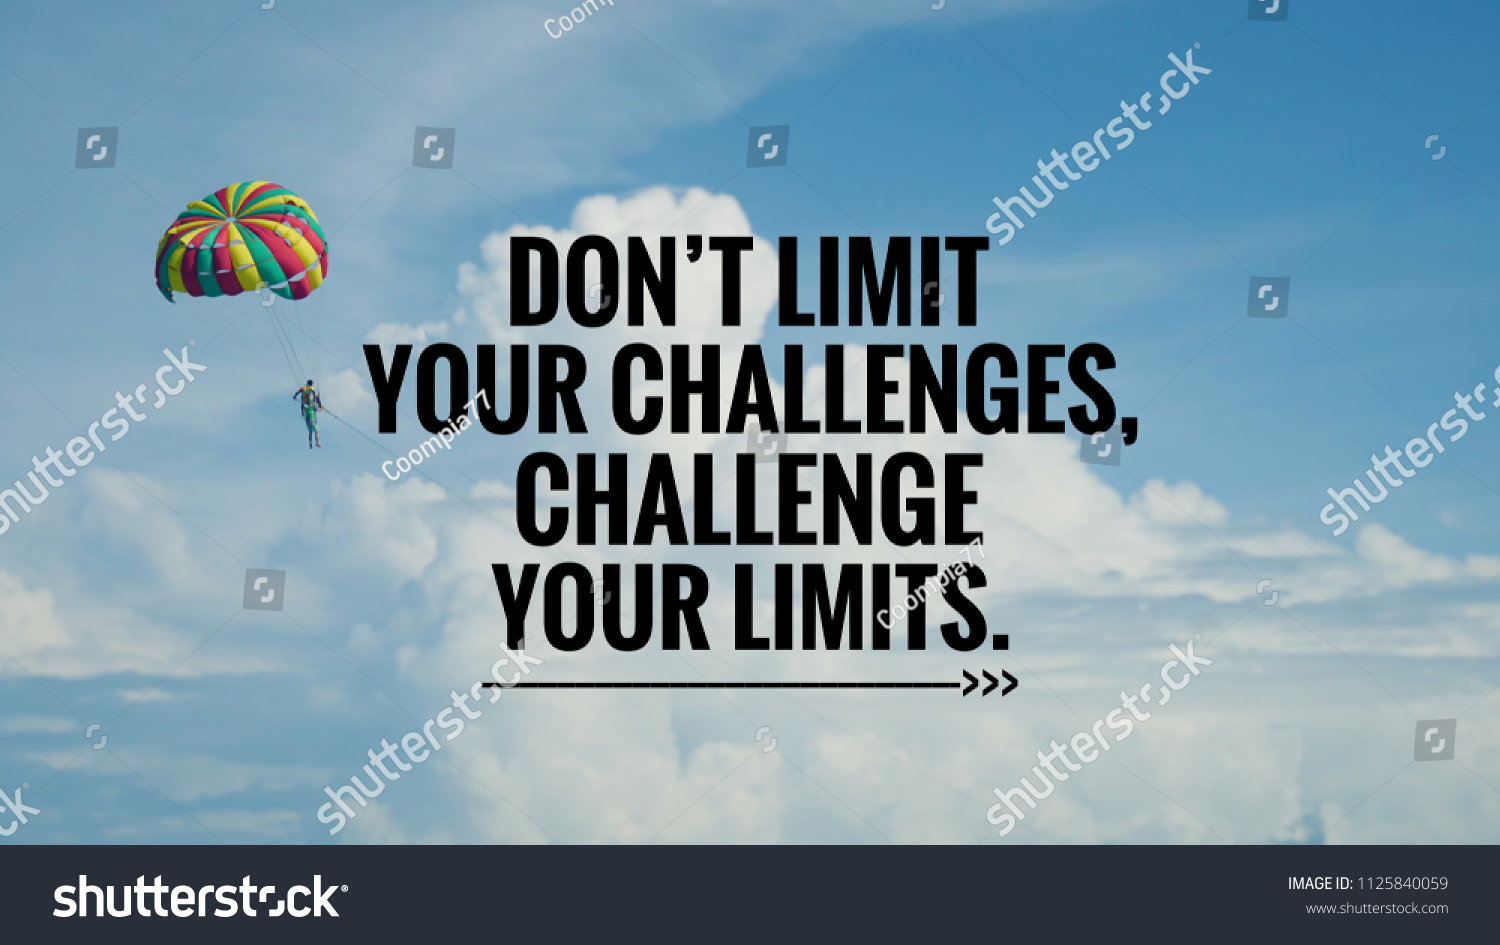 Motivational and inspirational quote - Don’t limit your challenges, challenge your limits. With vintage styled background. #1125840059